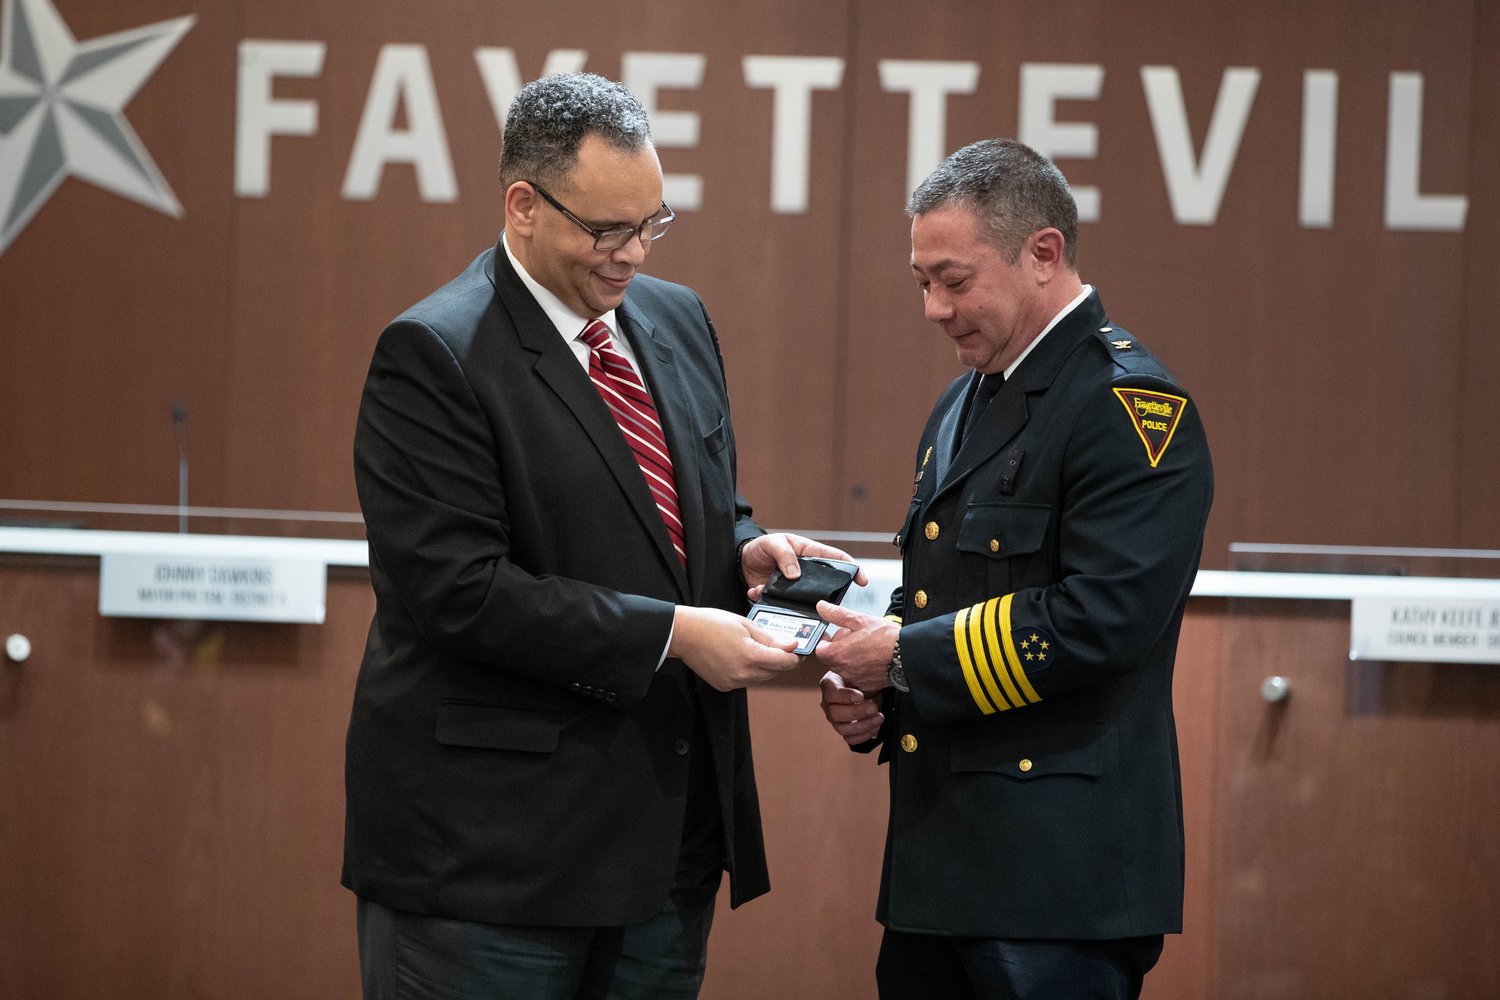 City Manager Doug Hewett presents the police chief's badge to Kimberle Braden on Friday at City Hall.